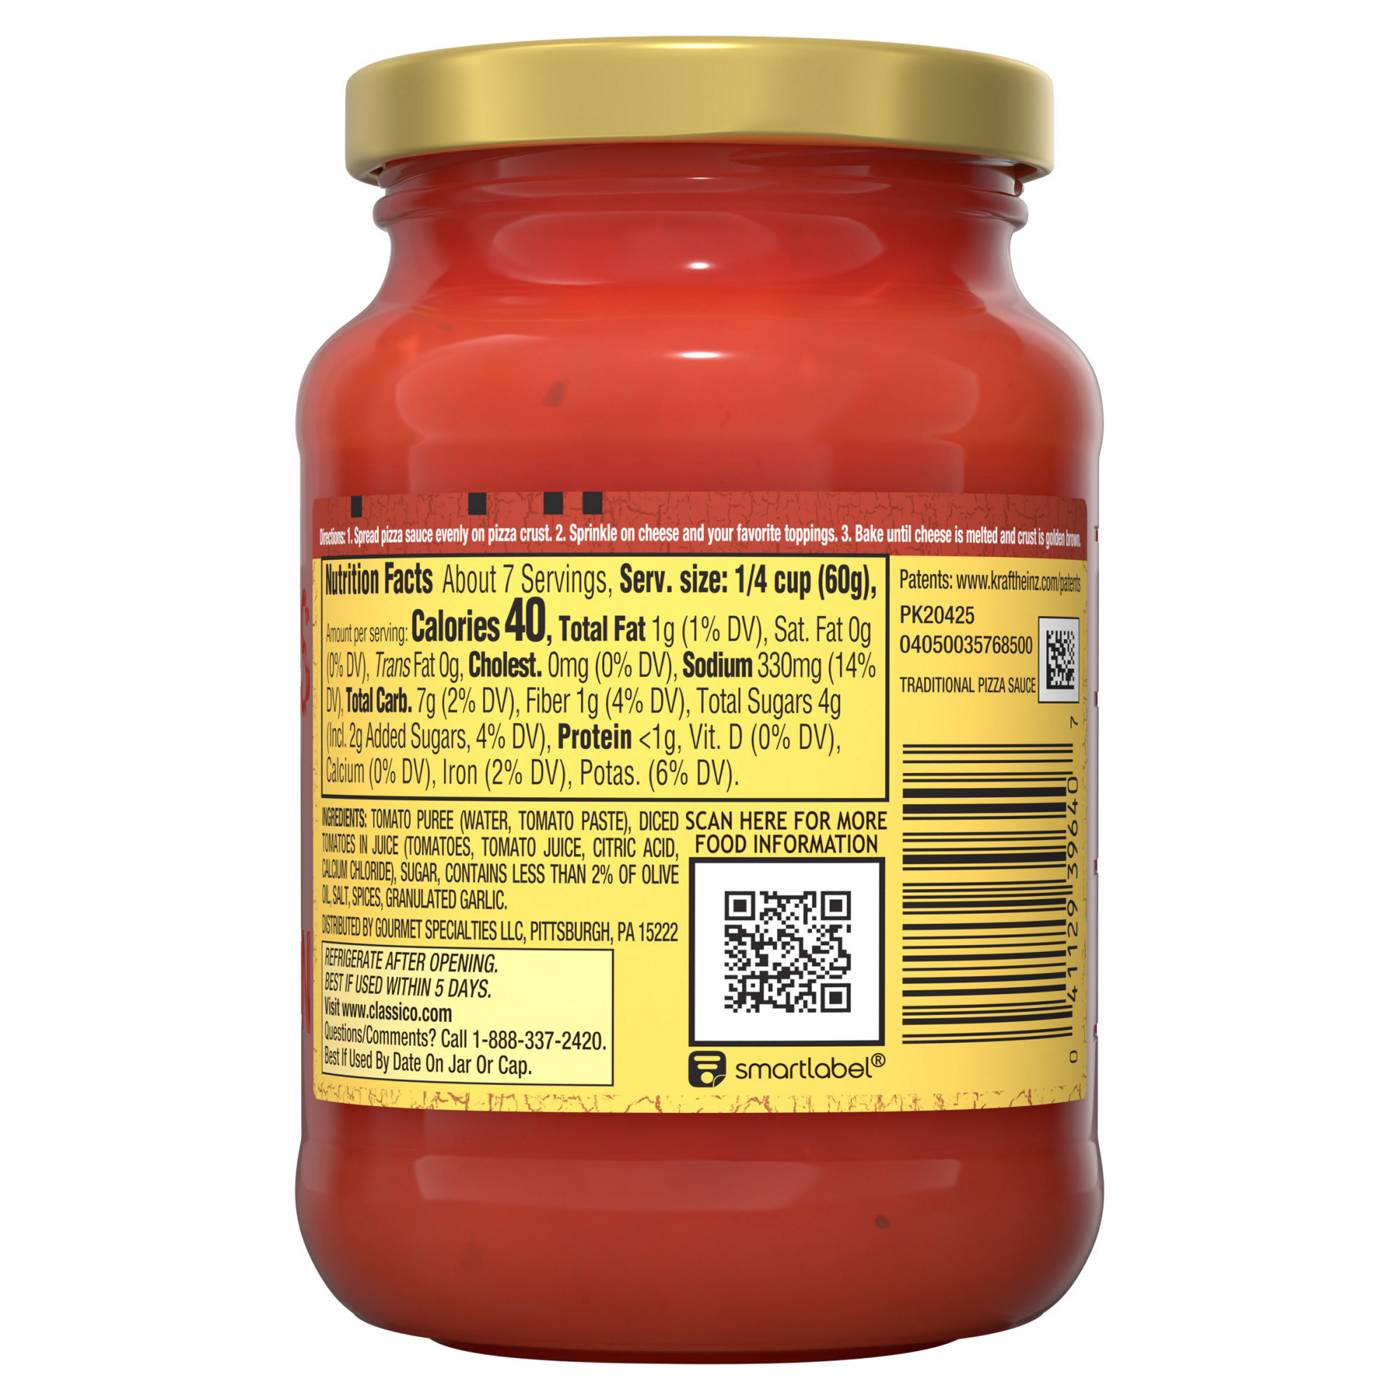 Classico Traditional Pizza Sauce; image 6 of 9